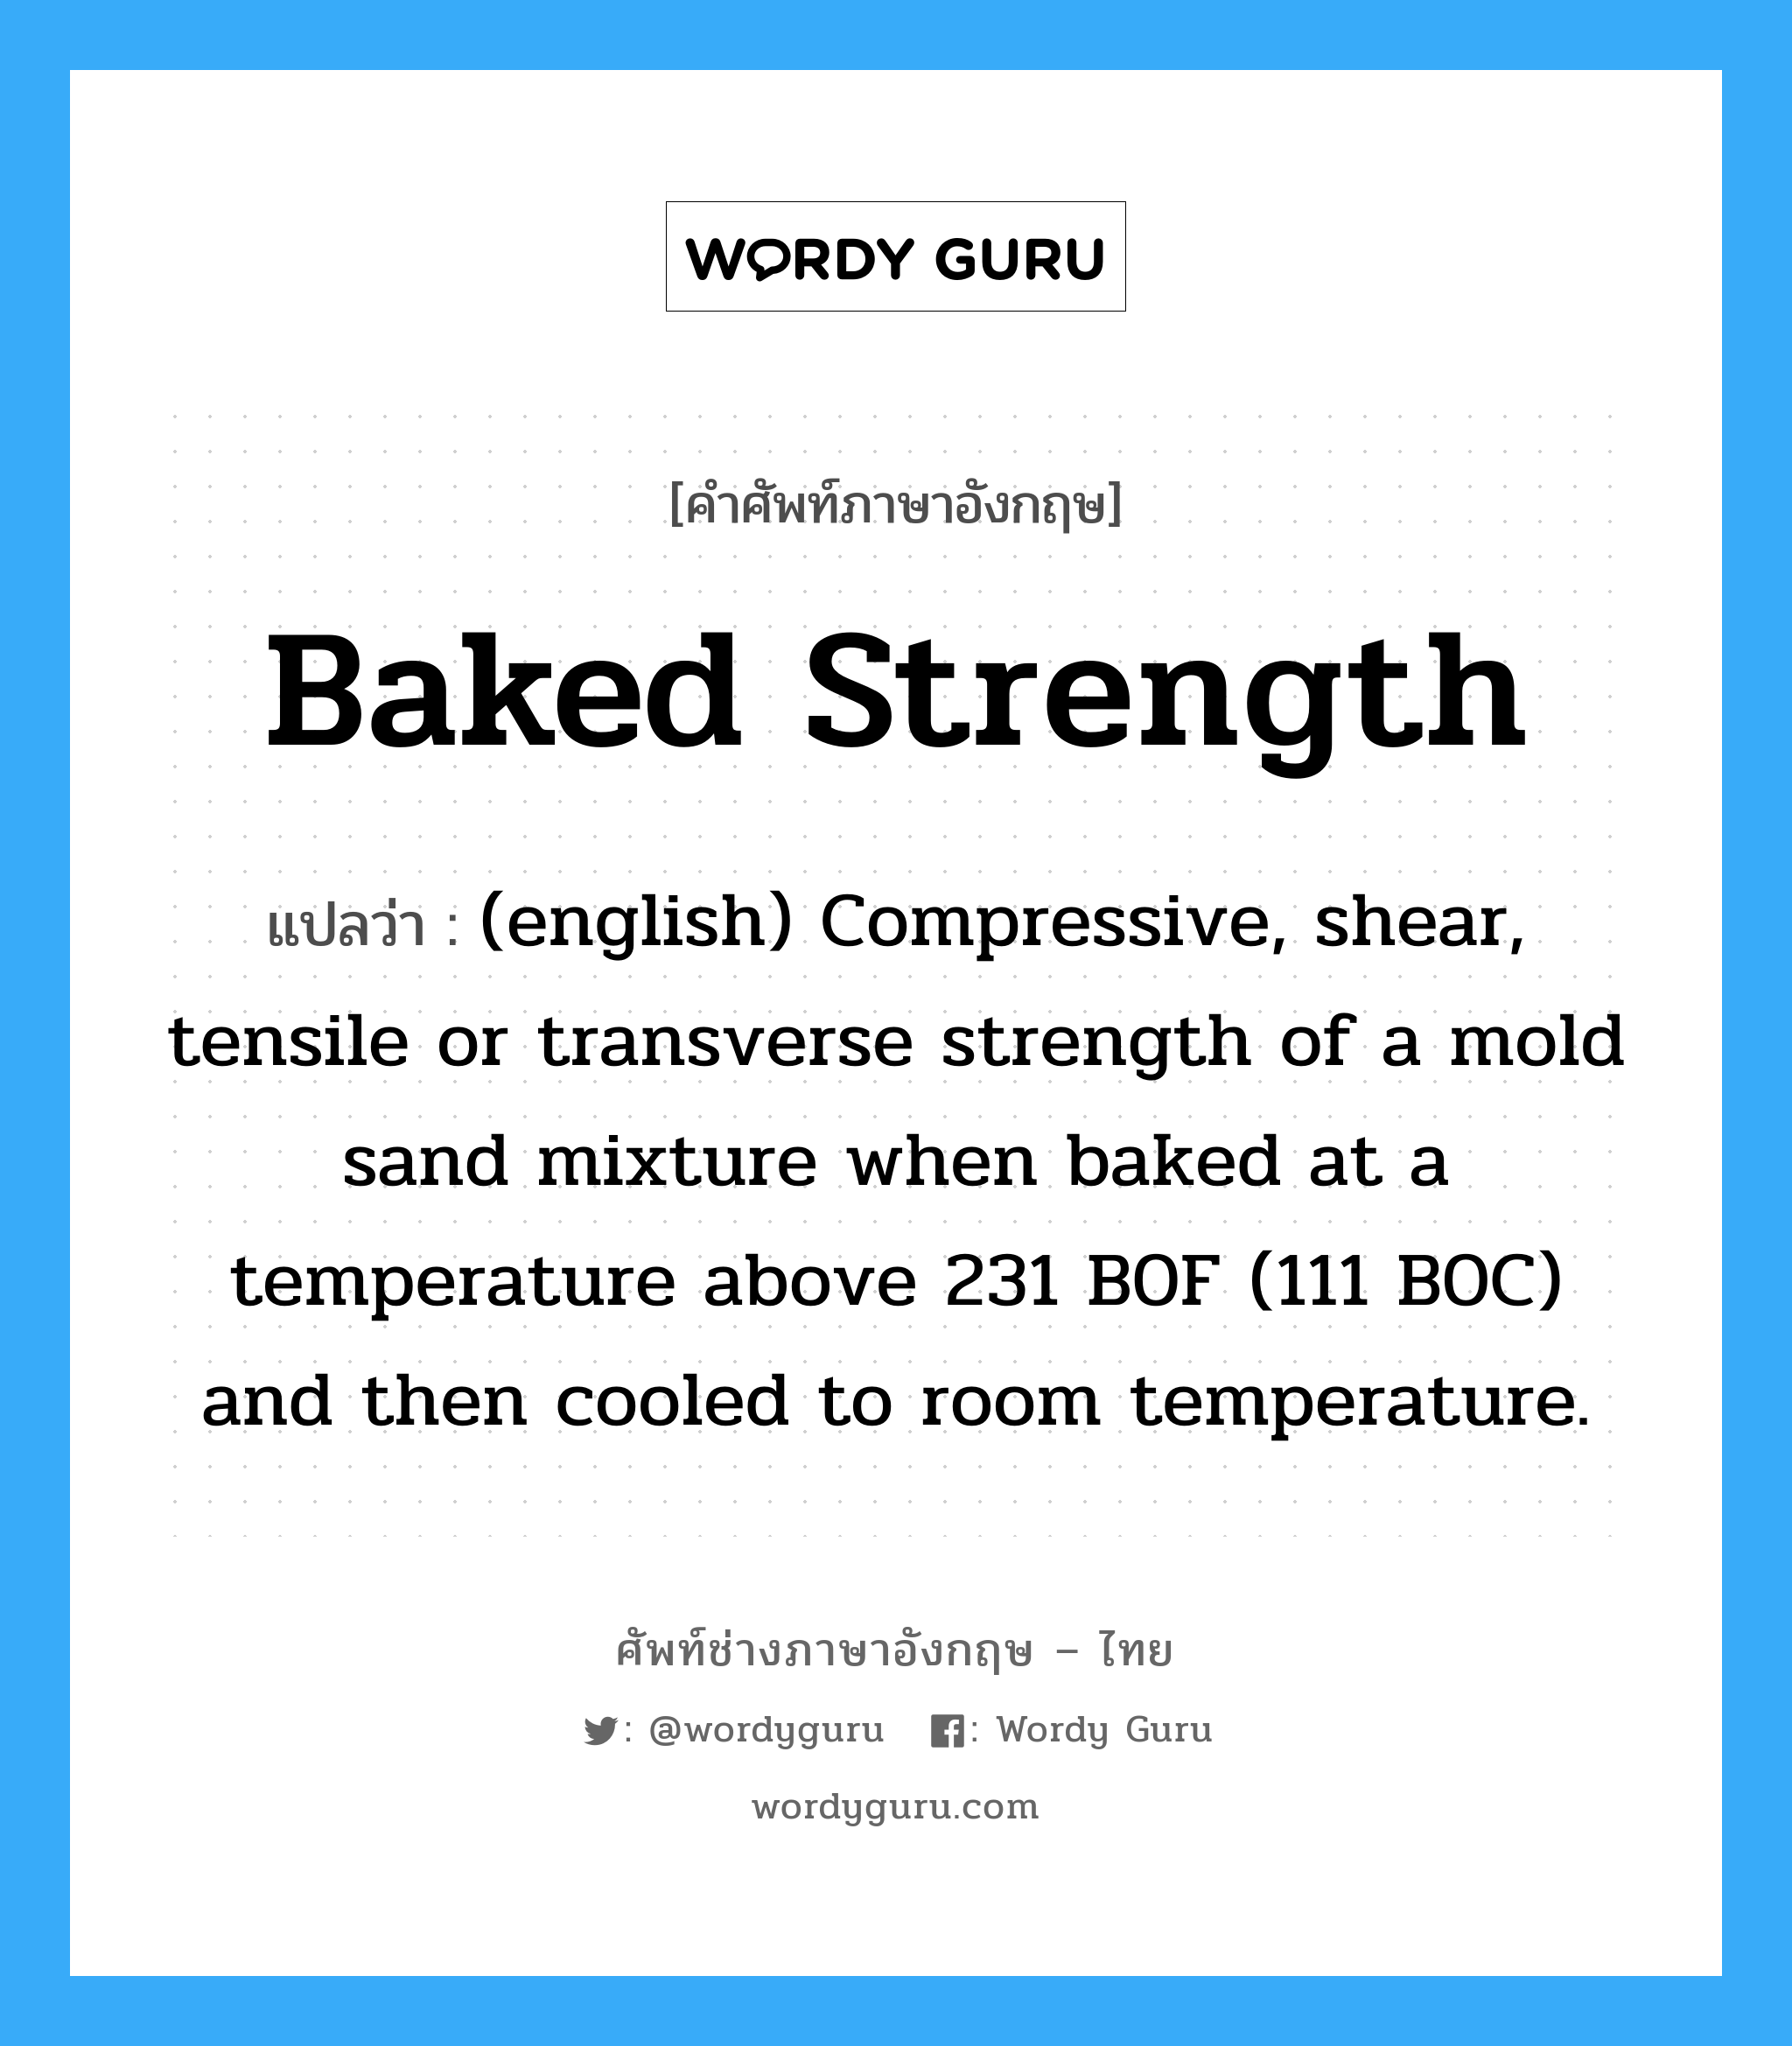 Baked Strength แปลว่า?, คำศัพท์ช่างภาษาอังกฤษ - ไทย Baked Strength คำศัพท์ภาษาอังกฤษ Baked Strength แปลว่า (english) Compressive, shear, tensile or transverse strength of a mold sand mixture when baked at a temperature above 231 B0F (111 B0C) and then cooled to room temperature.